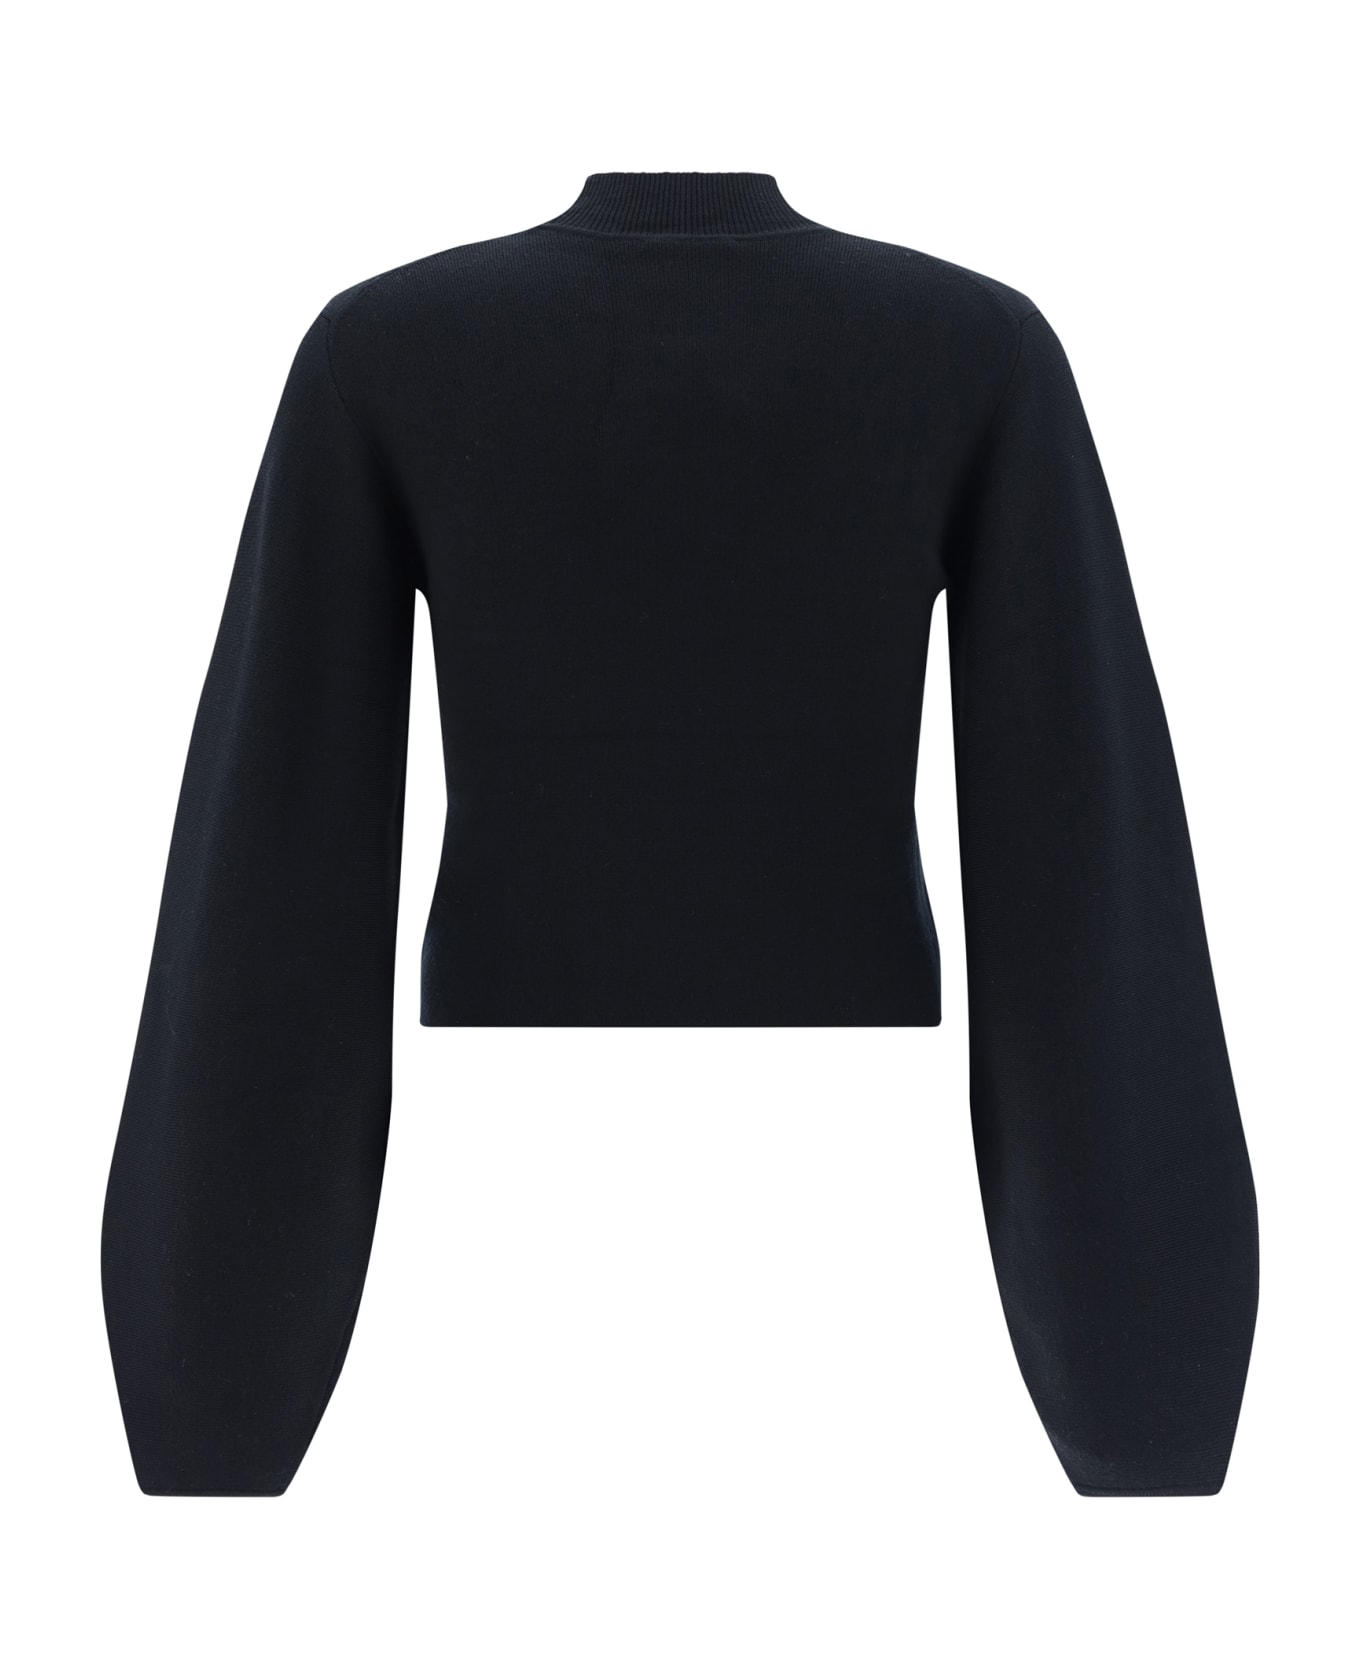 Chloé Baloon Sleeve Knit Cropped Sweater - Black